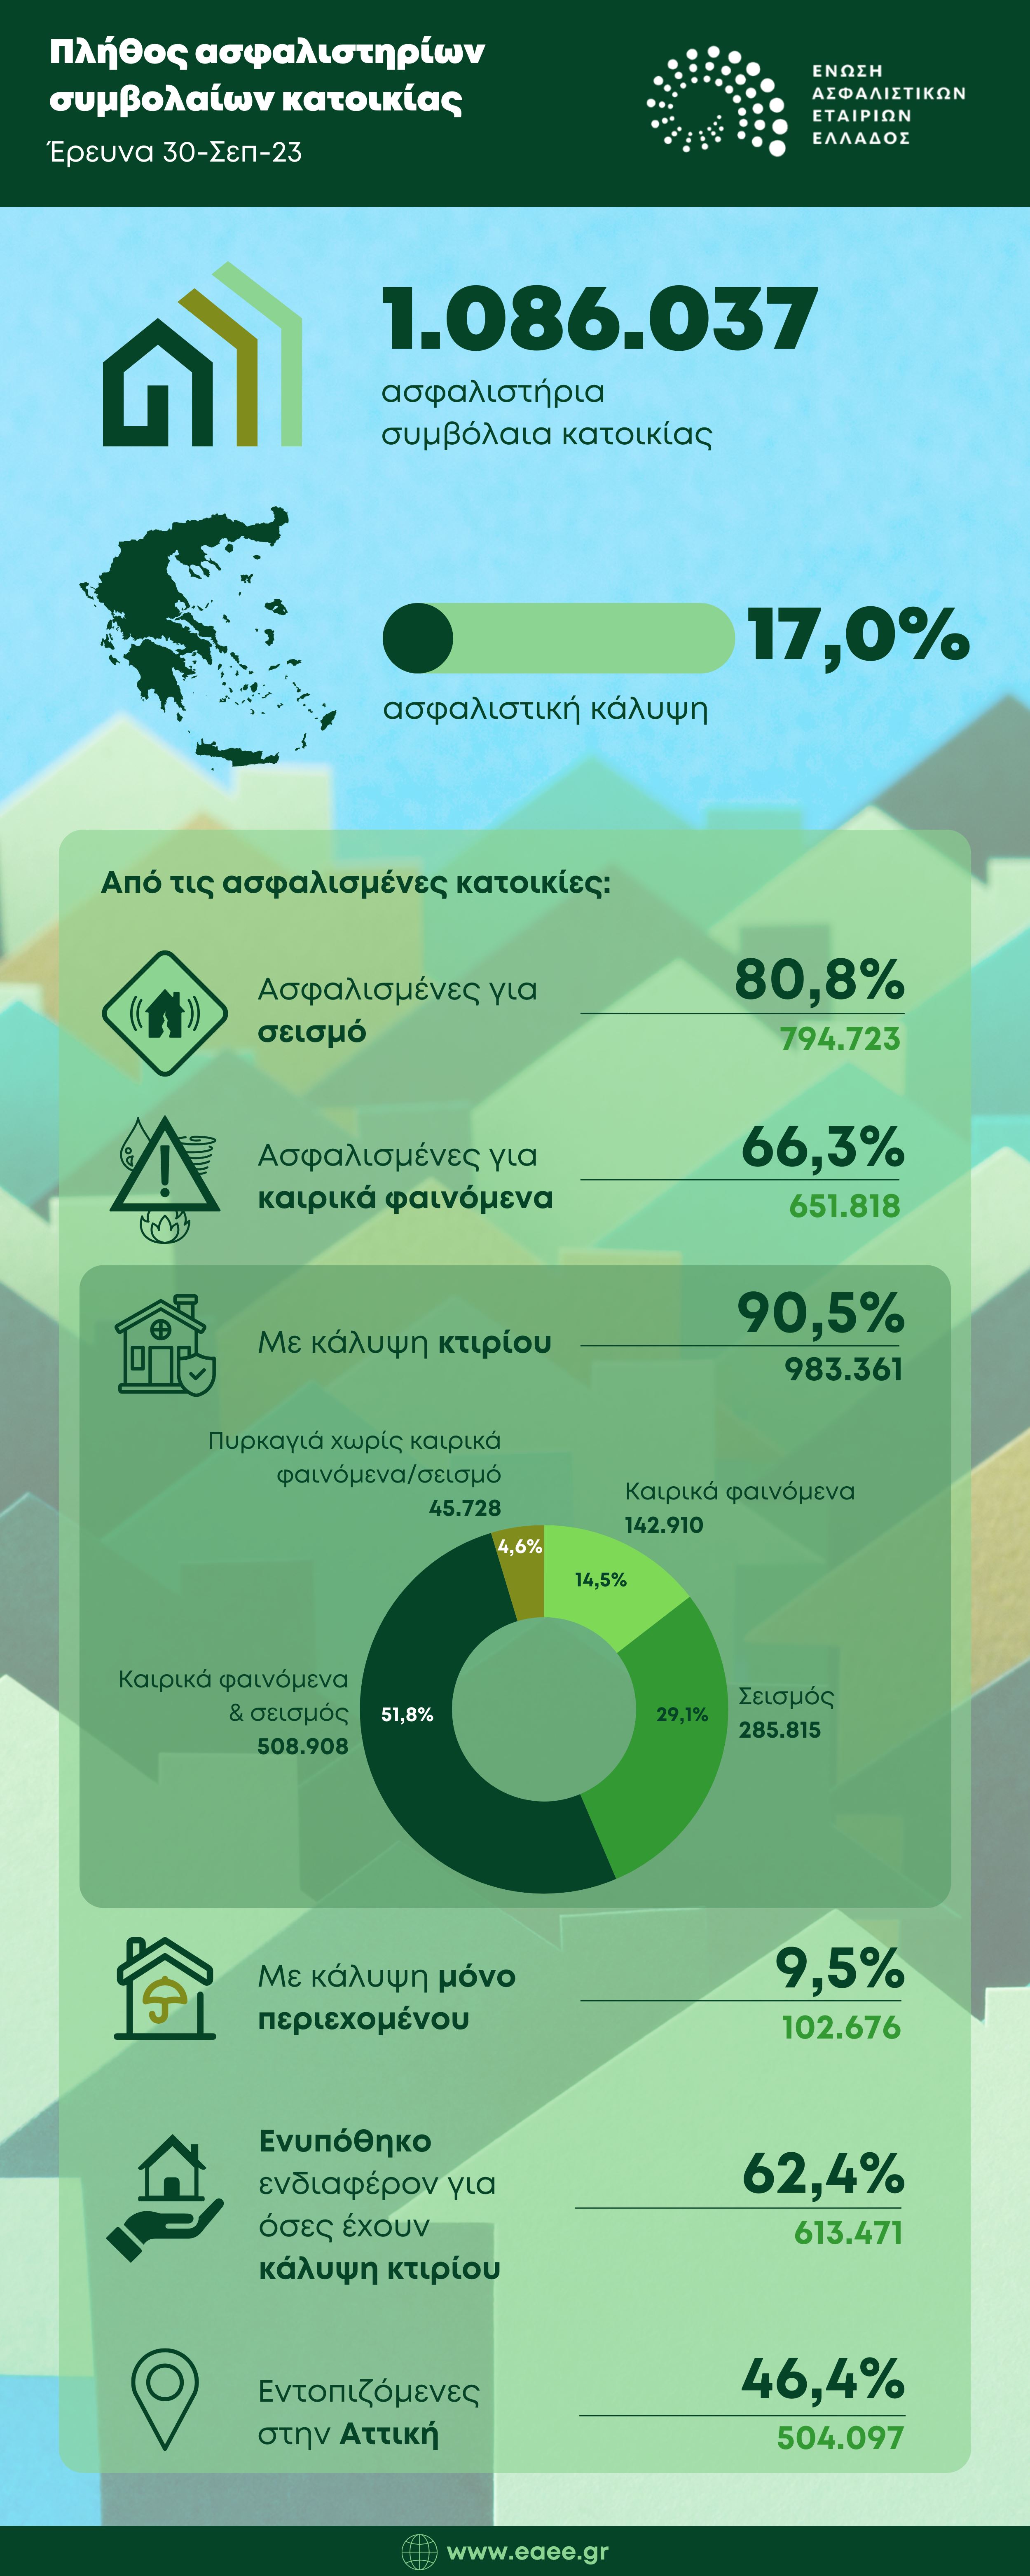 house_insurance_policies_sep-23_infographic_gr.jpg